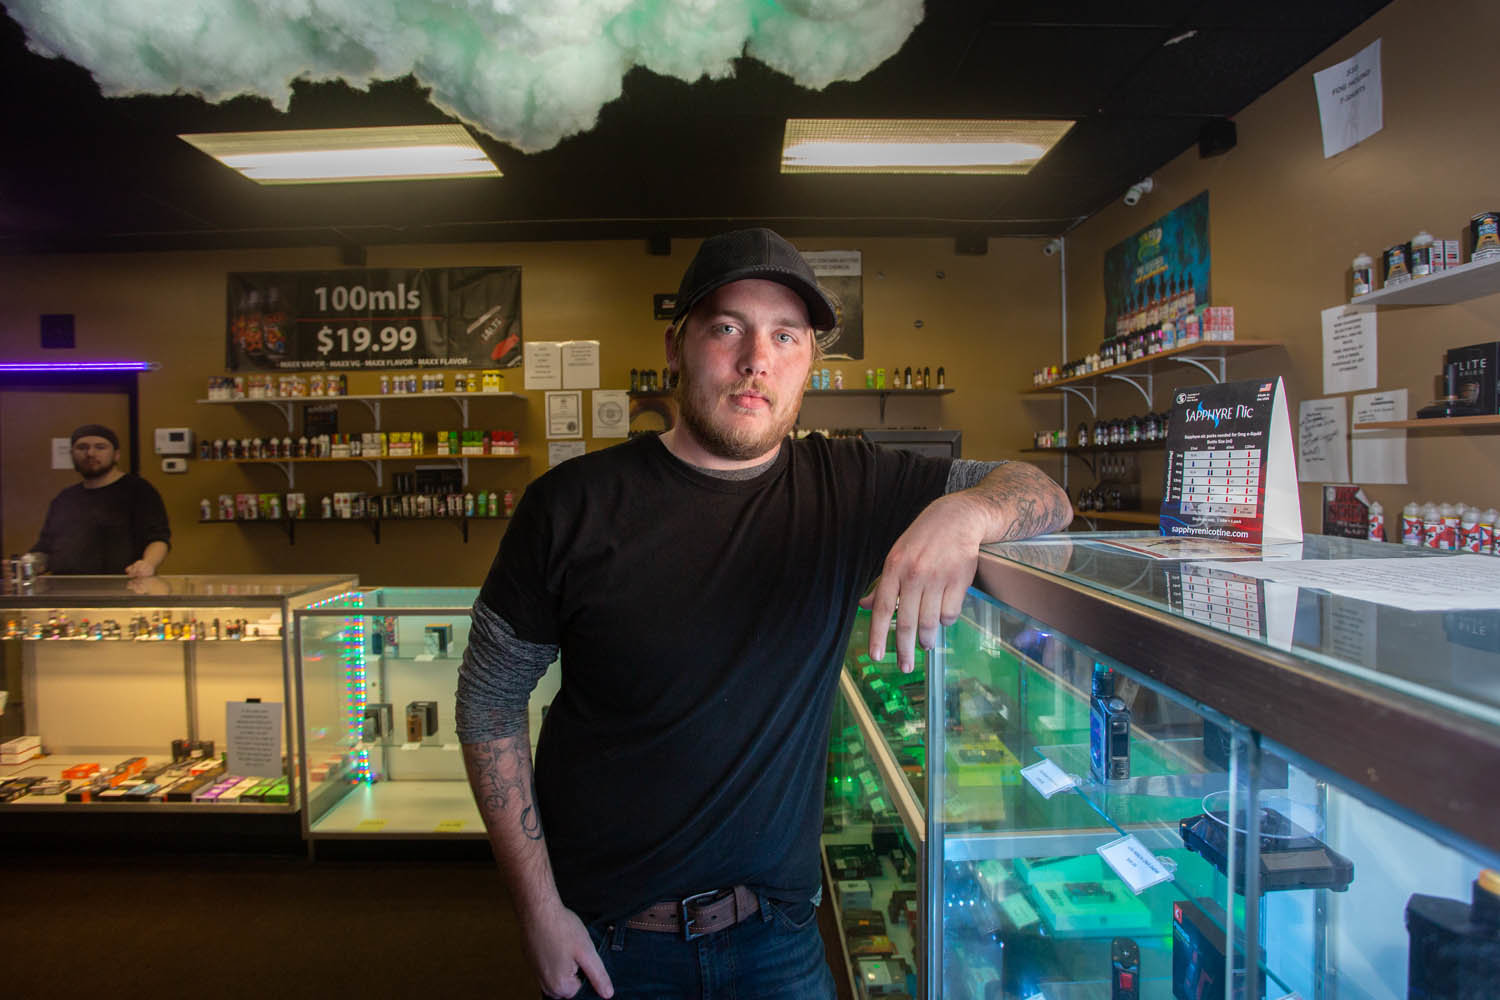 SMOKE OR FIRE: The Cloud Vapor owner Devin Rueschaw says untrue information is harming the vaping industry. He says vaping saved his life.